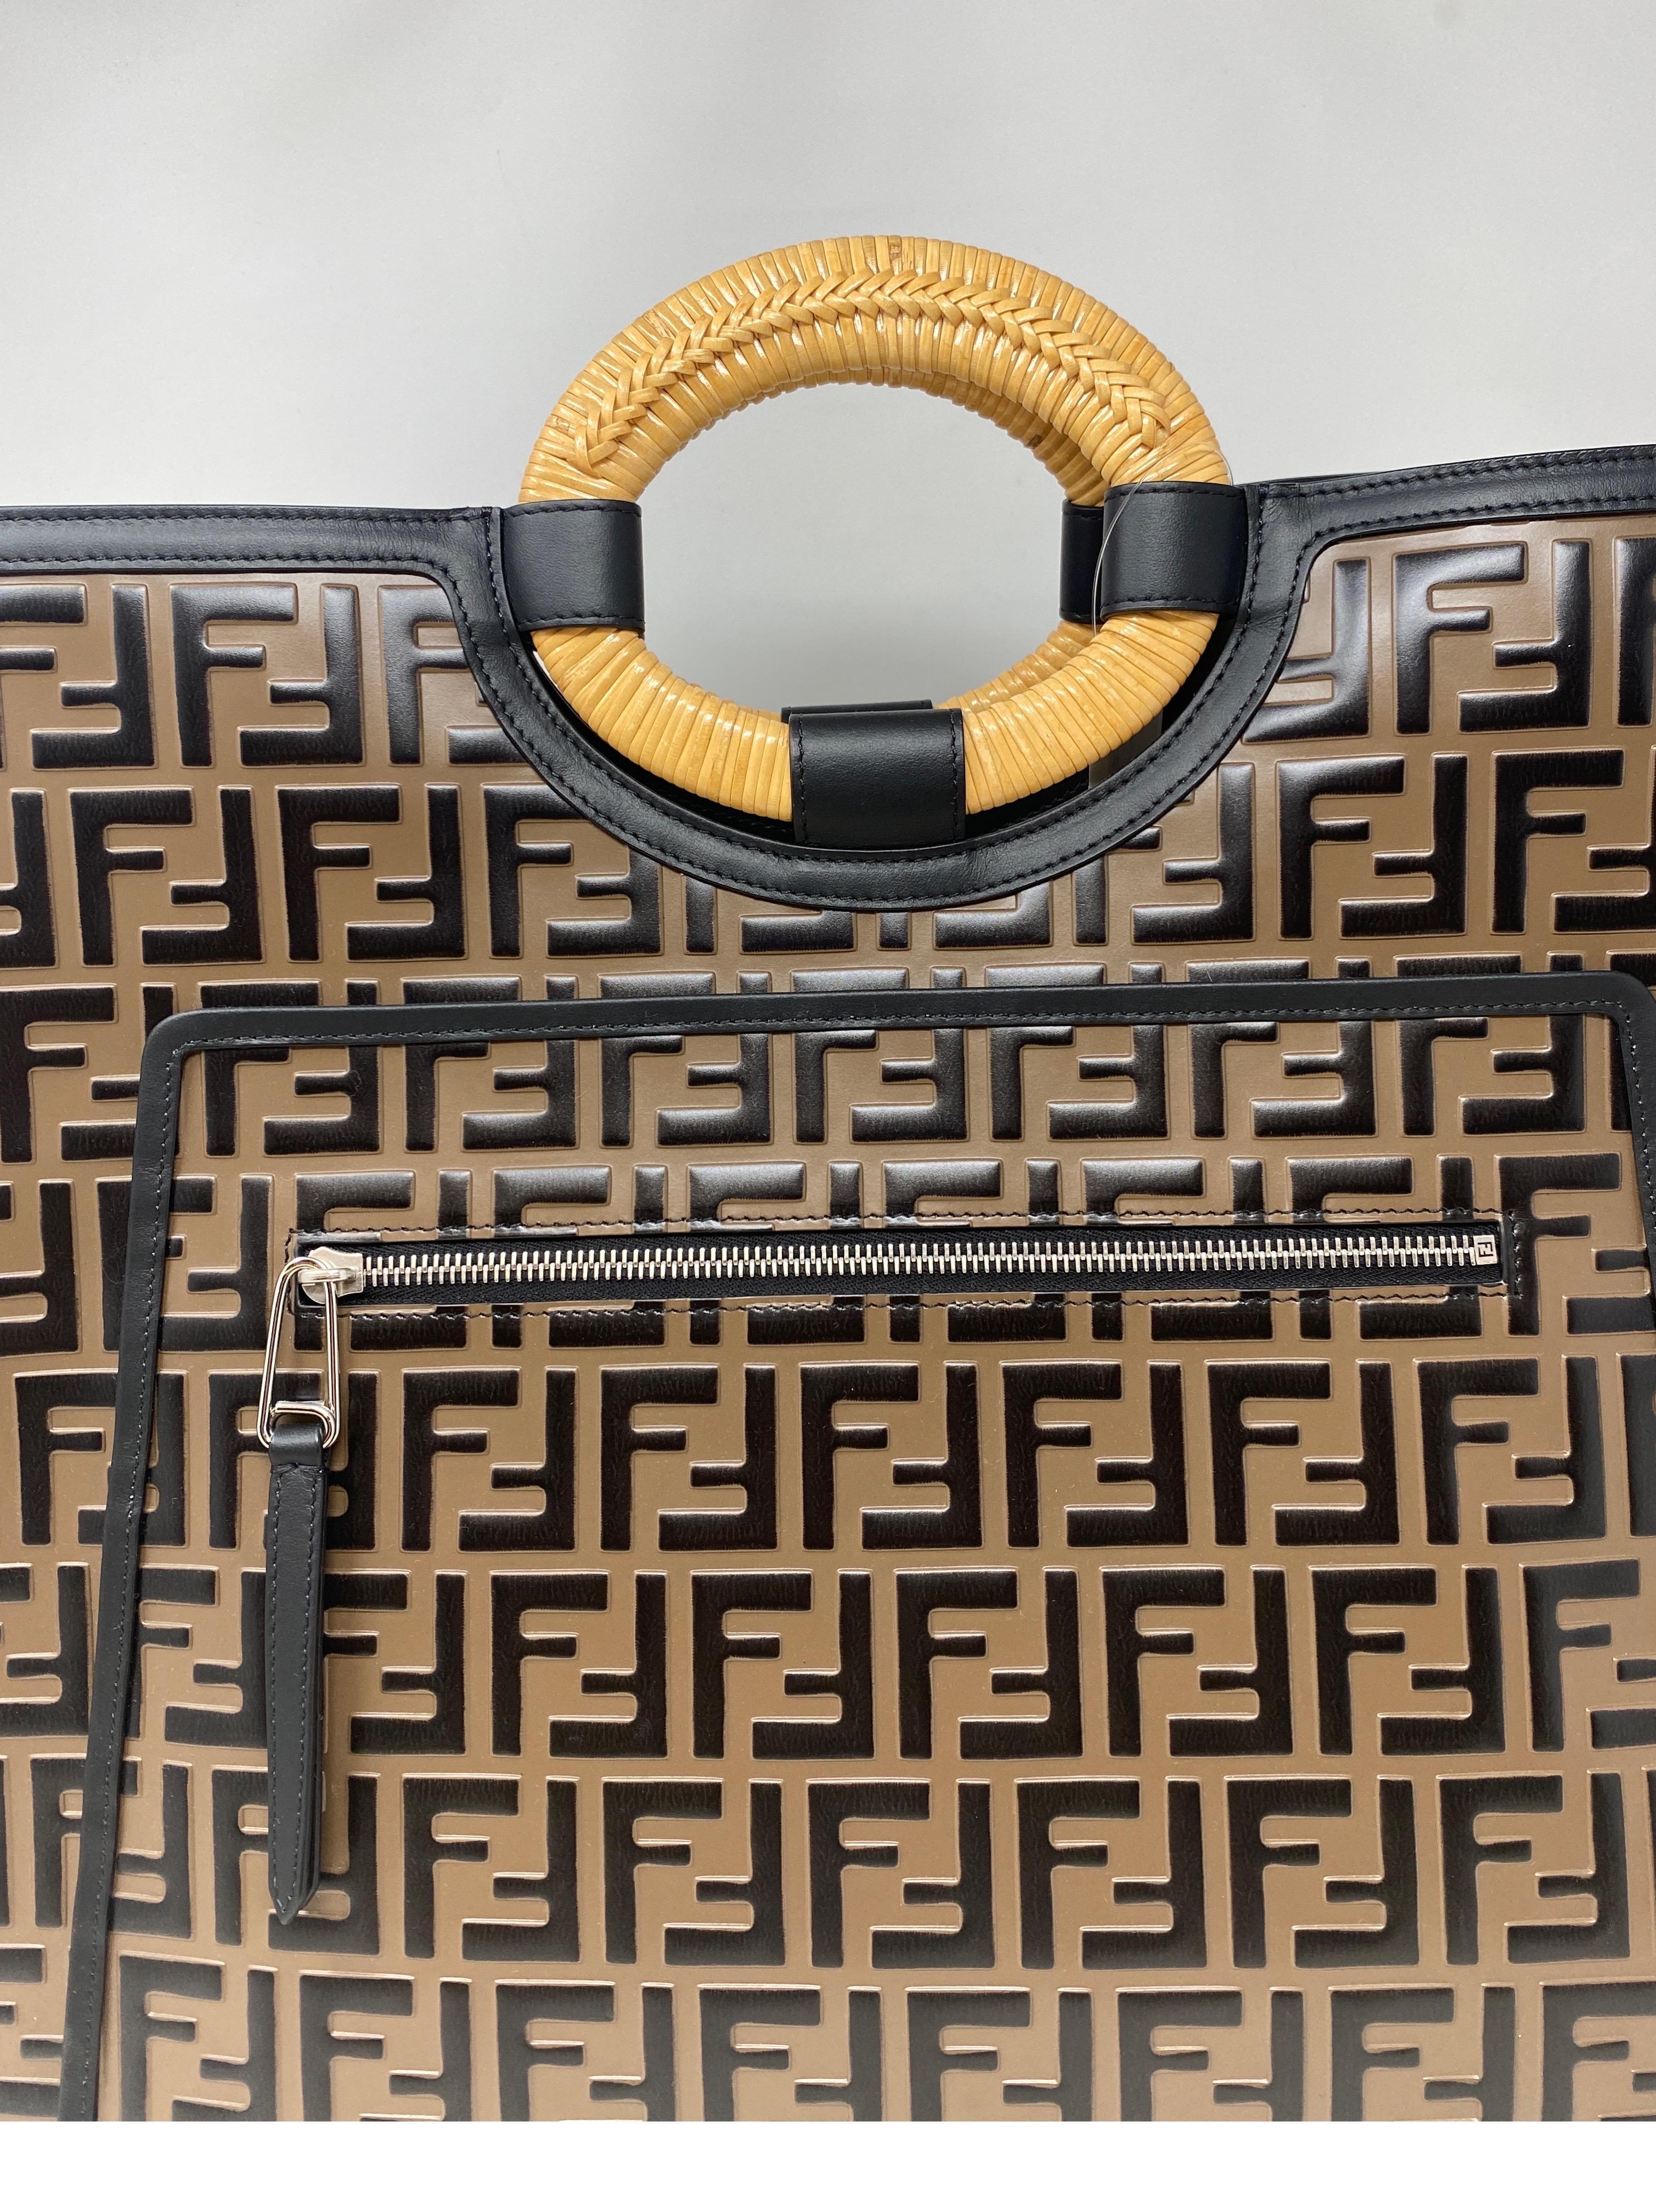 Fendi Vitello FF 1974 Large Embossed Runaway Shopper Bag. Great size tote bag. Embossed Fendi leather bag. New with tags. Never worn. Beautiful bag with woven handle. Guaranteed authentic. 